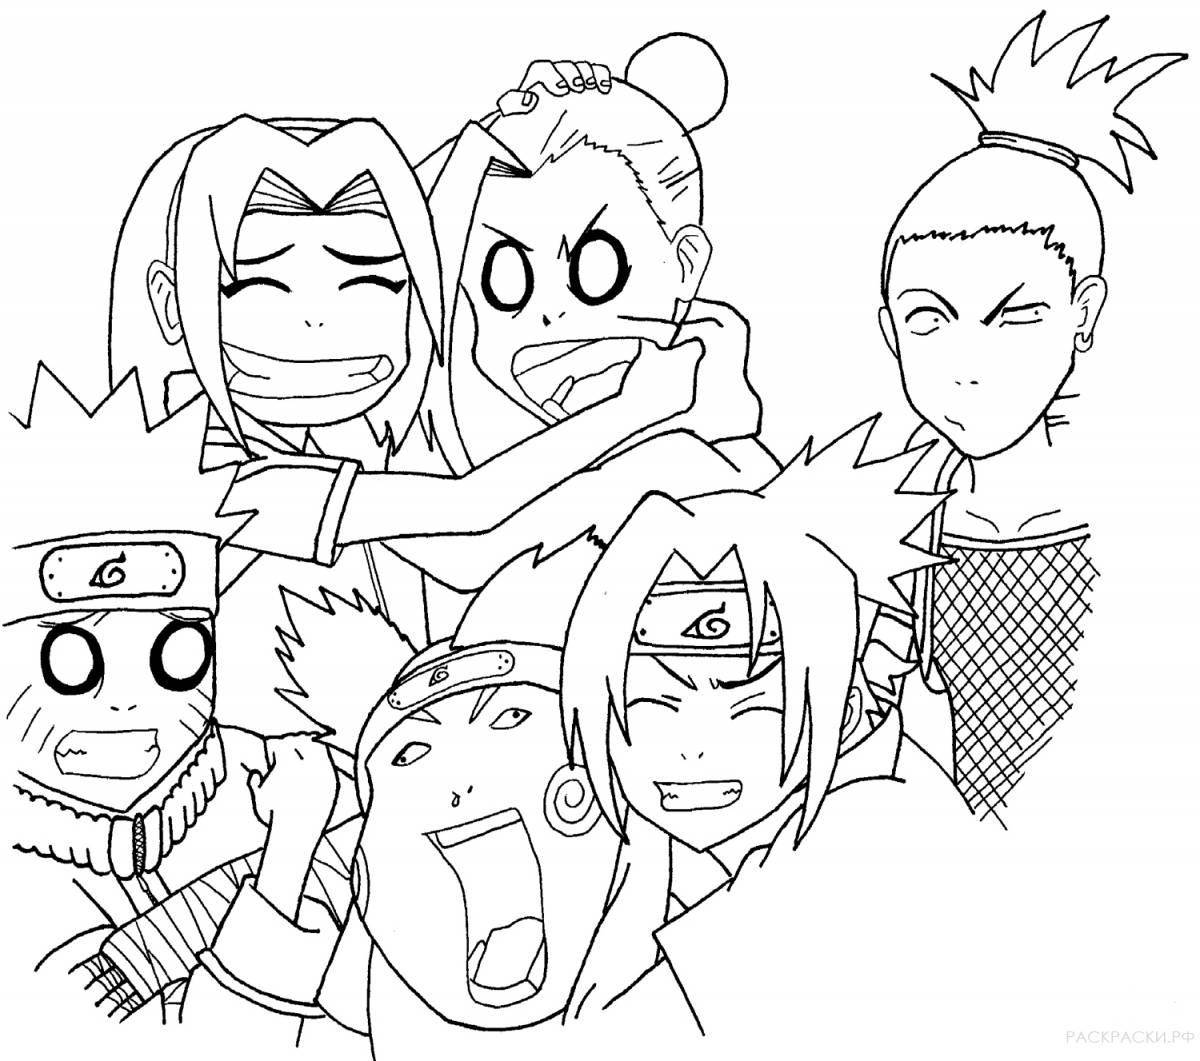 Outstanding naruto coloring book for girls